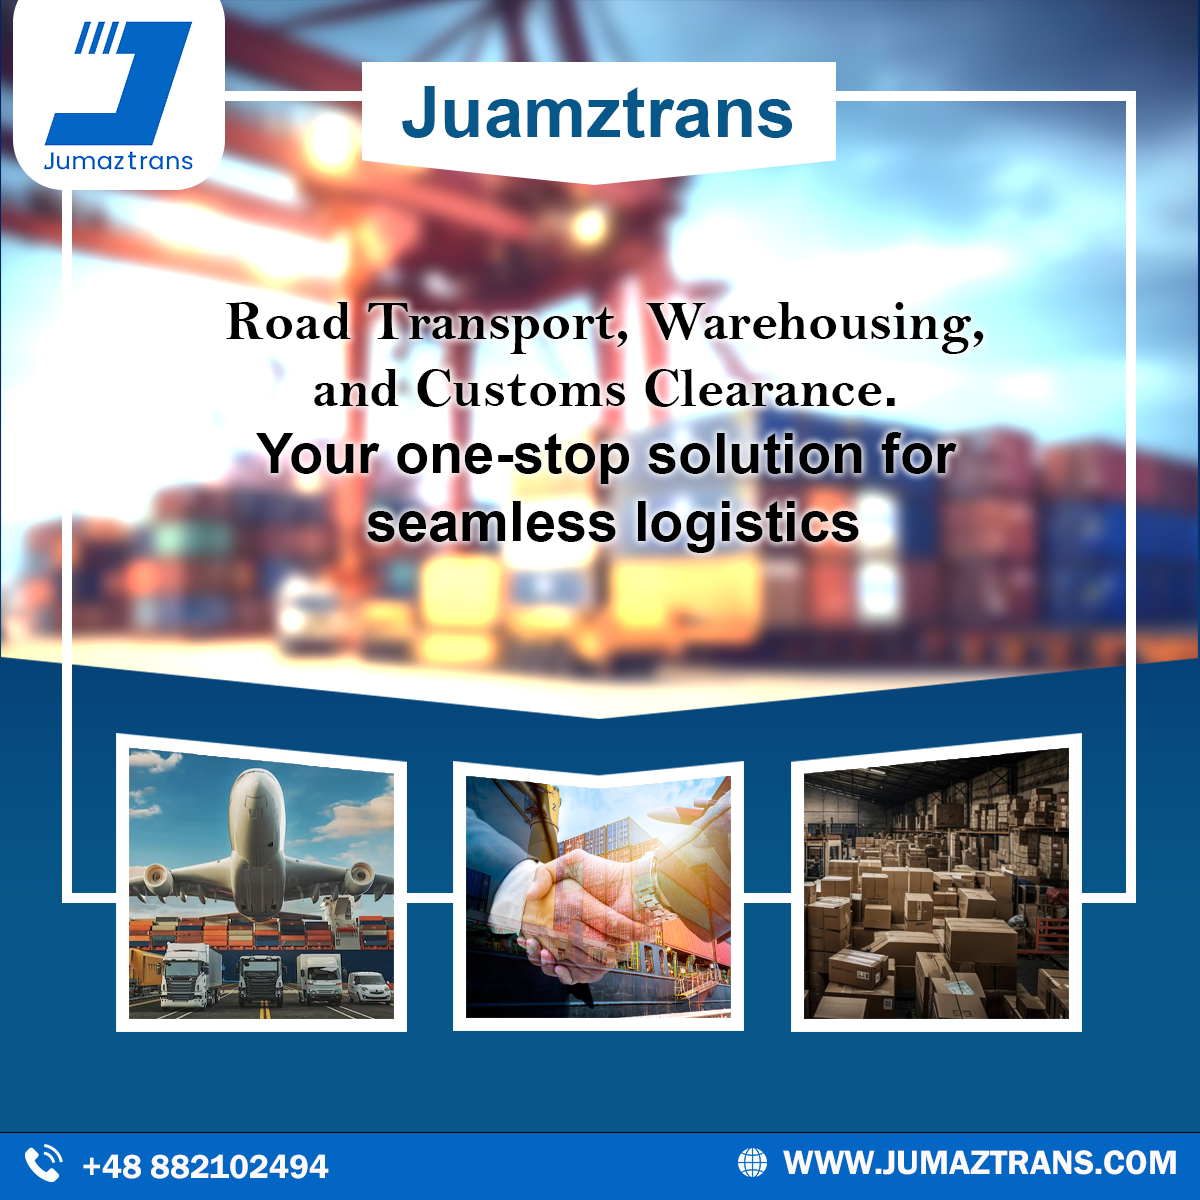 Road Transport, Warehousing, and Customs Clearance.
Your one-stop solution for seamless logistics

.
.
#shipping #logistics #freeshipping #worldwideshipping #shippingworldwide #dropshipping #shippingavailable #logisticscompany #shippingalloverindia #logisticsmanagement